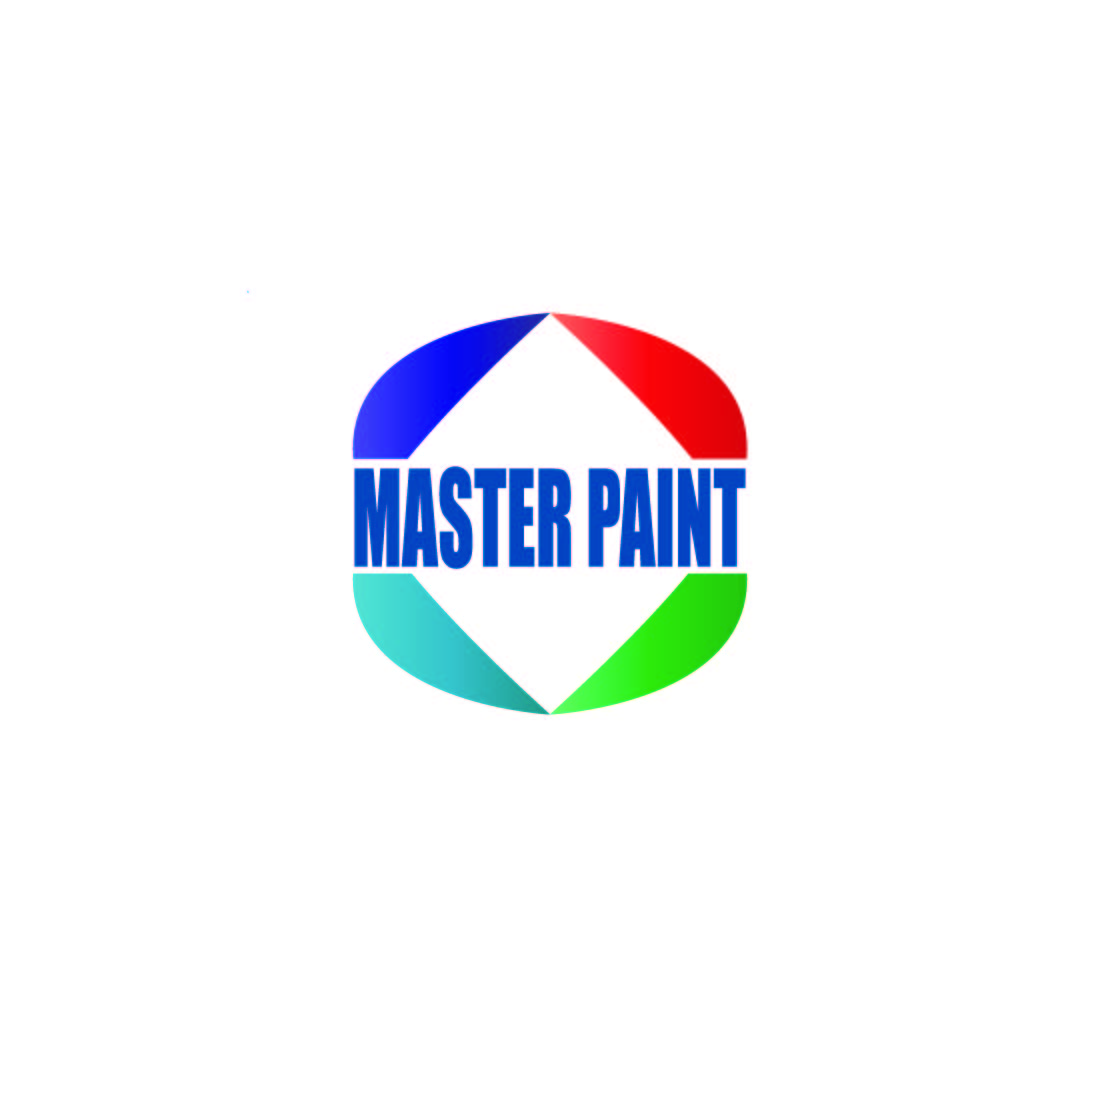 MASTER PAINT cover image.